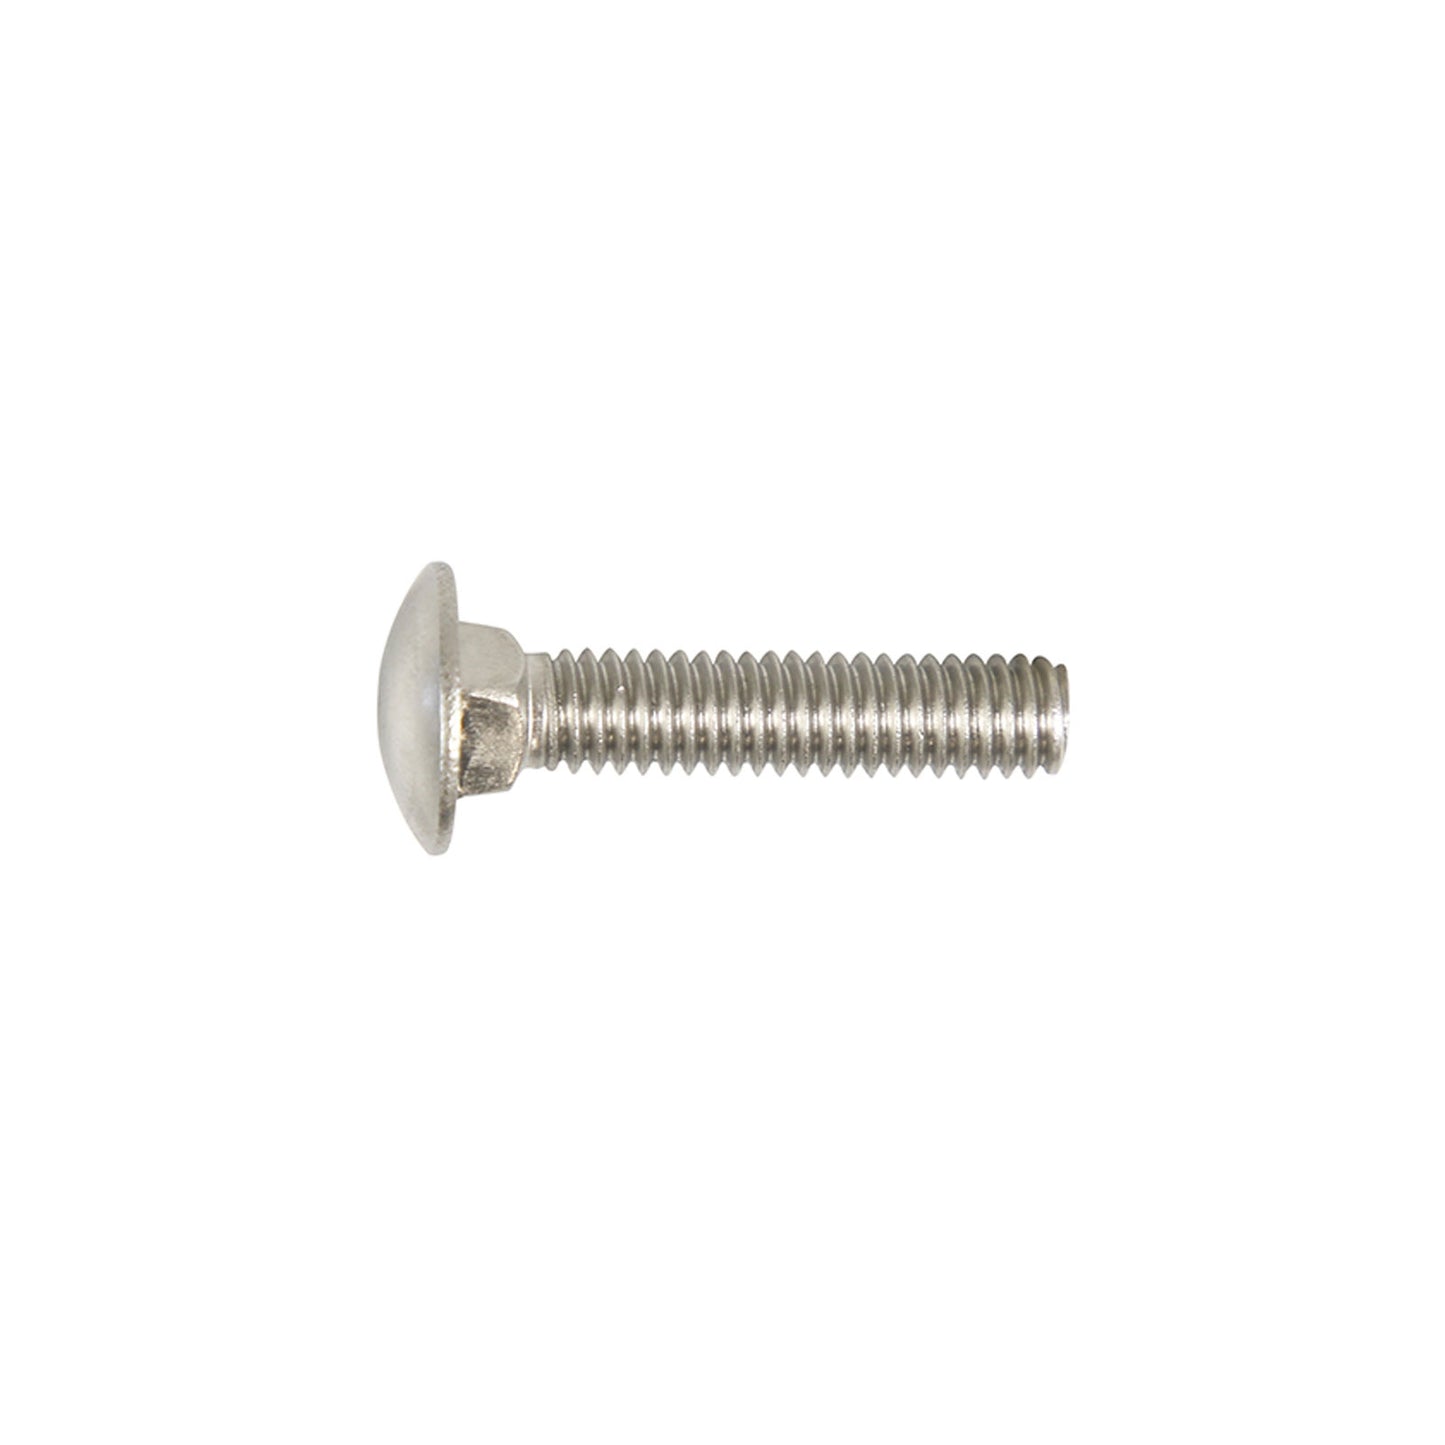 5/16"-18 x 1-1/2" Conquest Carriage Bolt - 304 Stainless Steel